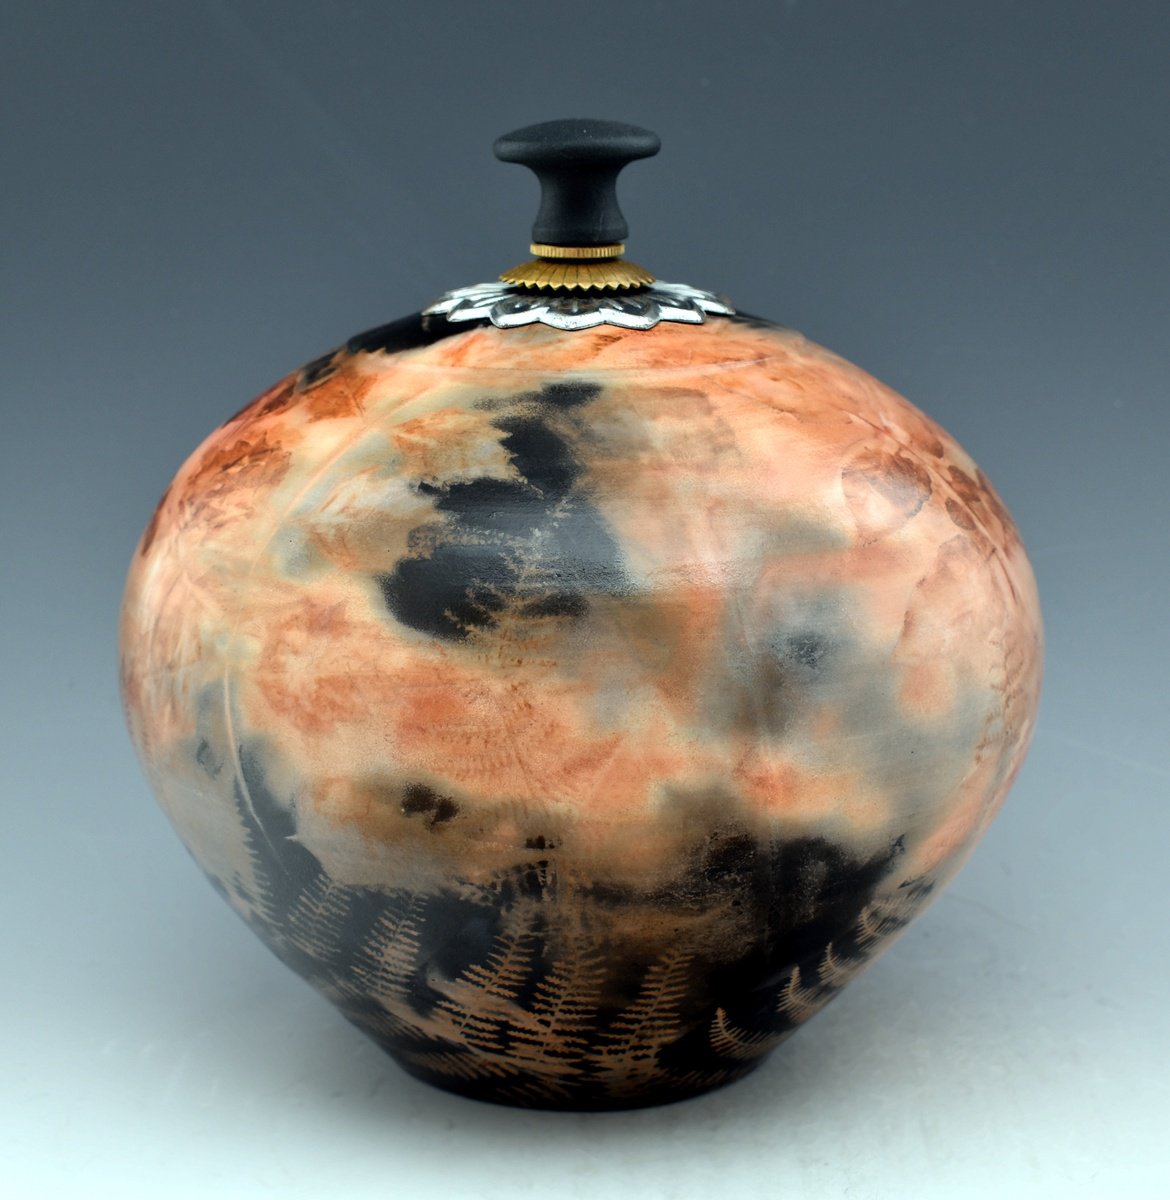 Sagger fired covered vessel with additions. B260 by Ron Mello